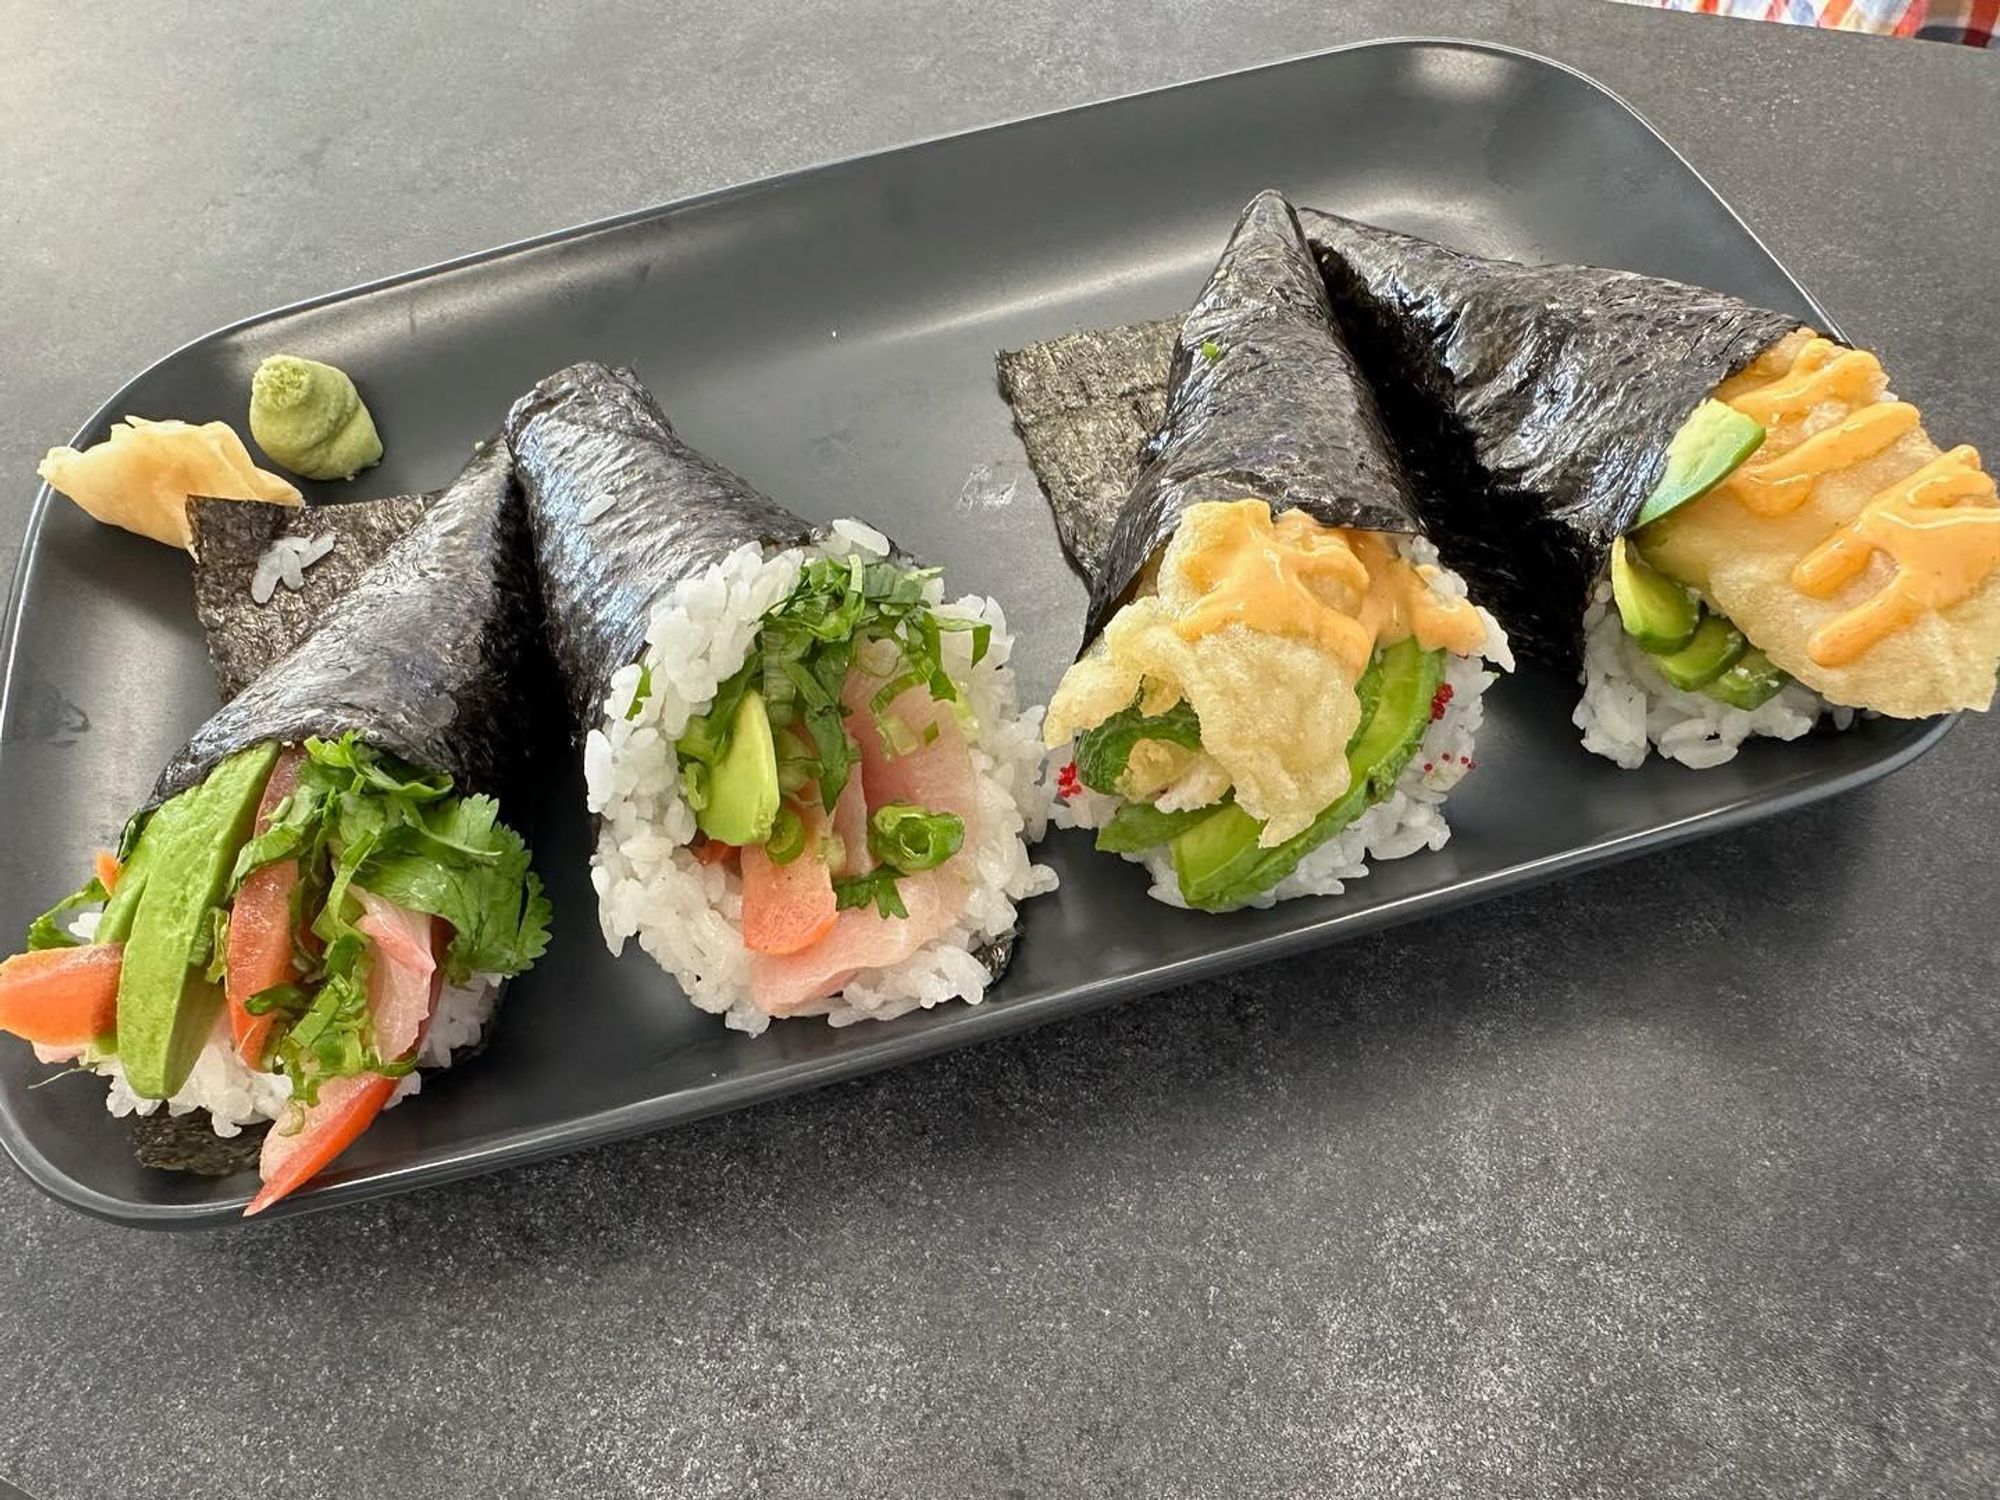 Yellowfish Sushi now has a second location.